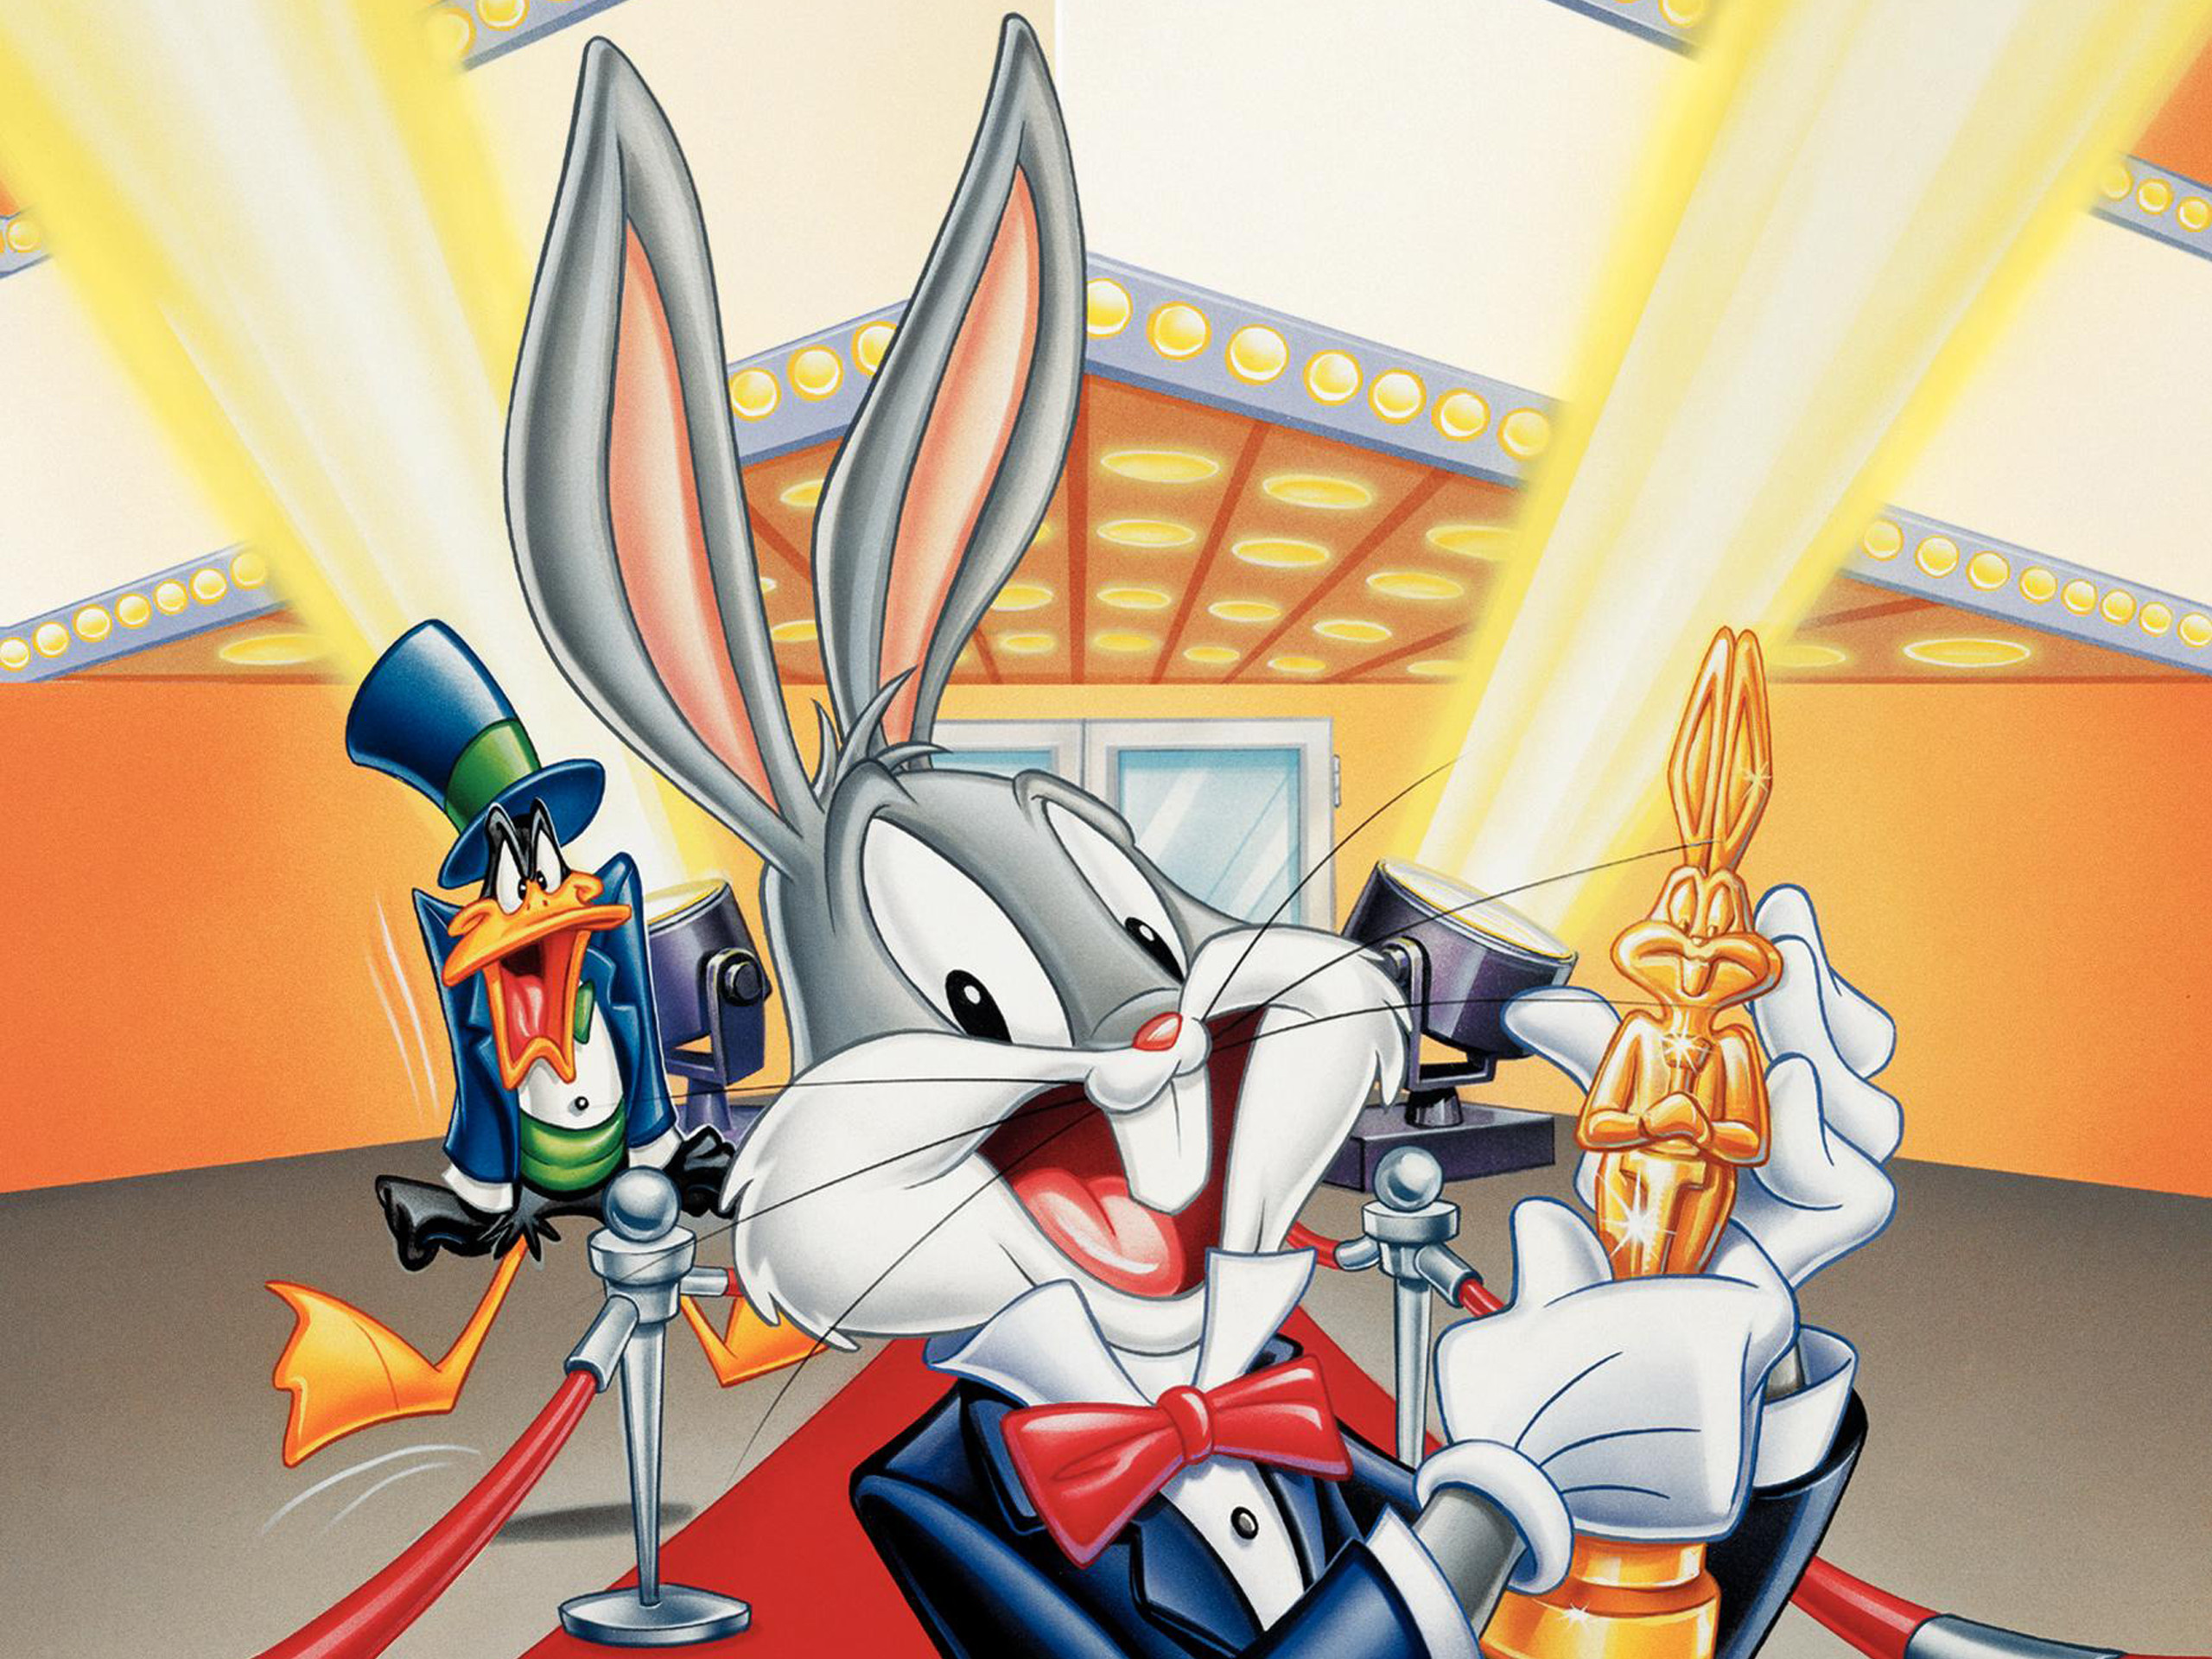 2560x1920 Wallpaper Hd Baby Looney Toons Backgrounds High Quality Of Laptop Bugs Bunny